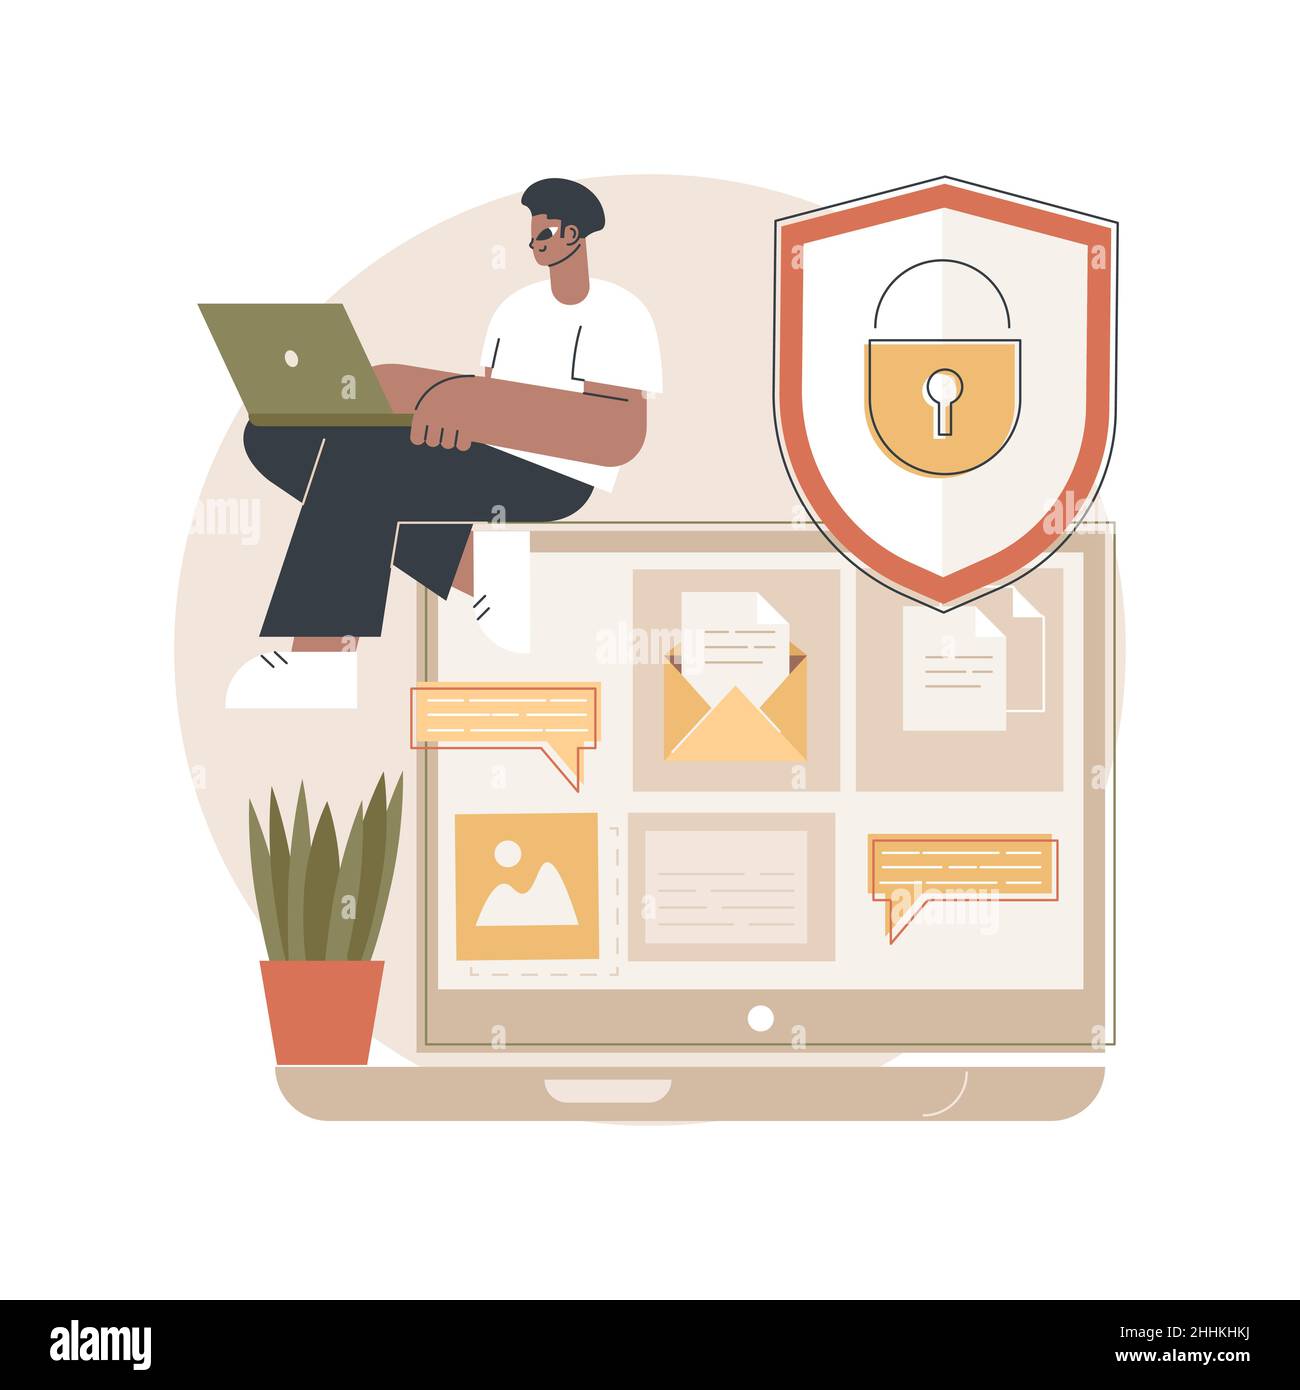 Digital ethics and privacy abstract concept vector illustration. Digital mediums behavior, internet privacy violation, secure online data protection, user information gained abstract metaphor. Stock Vector